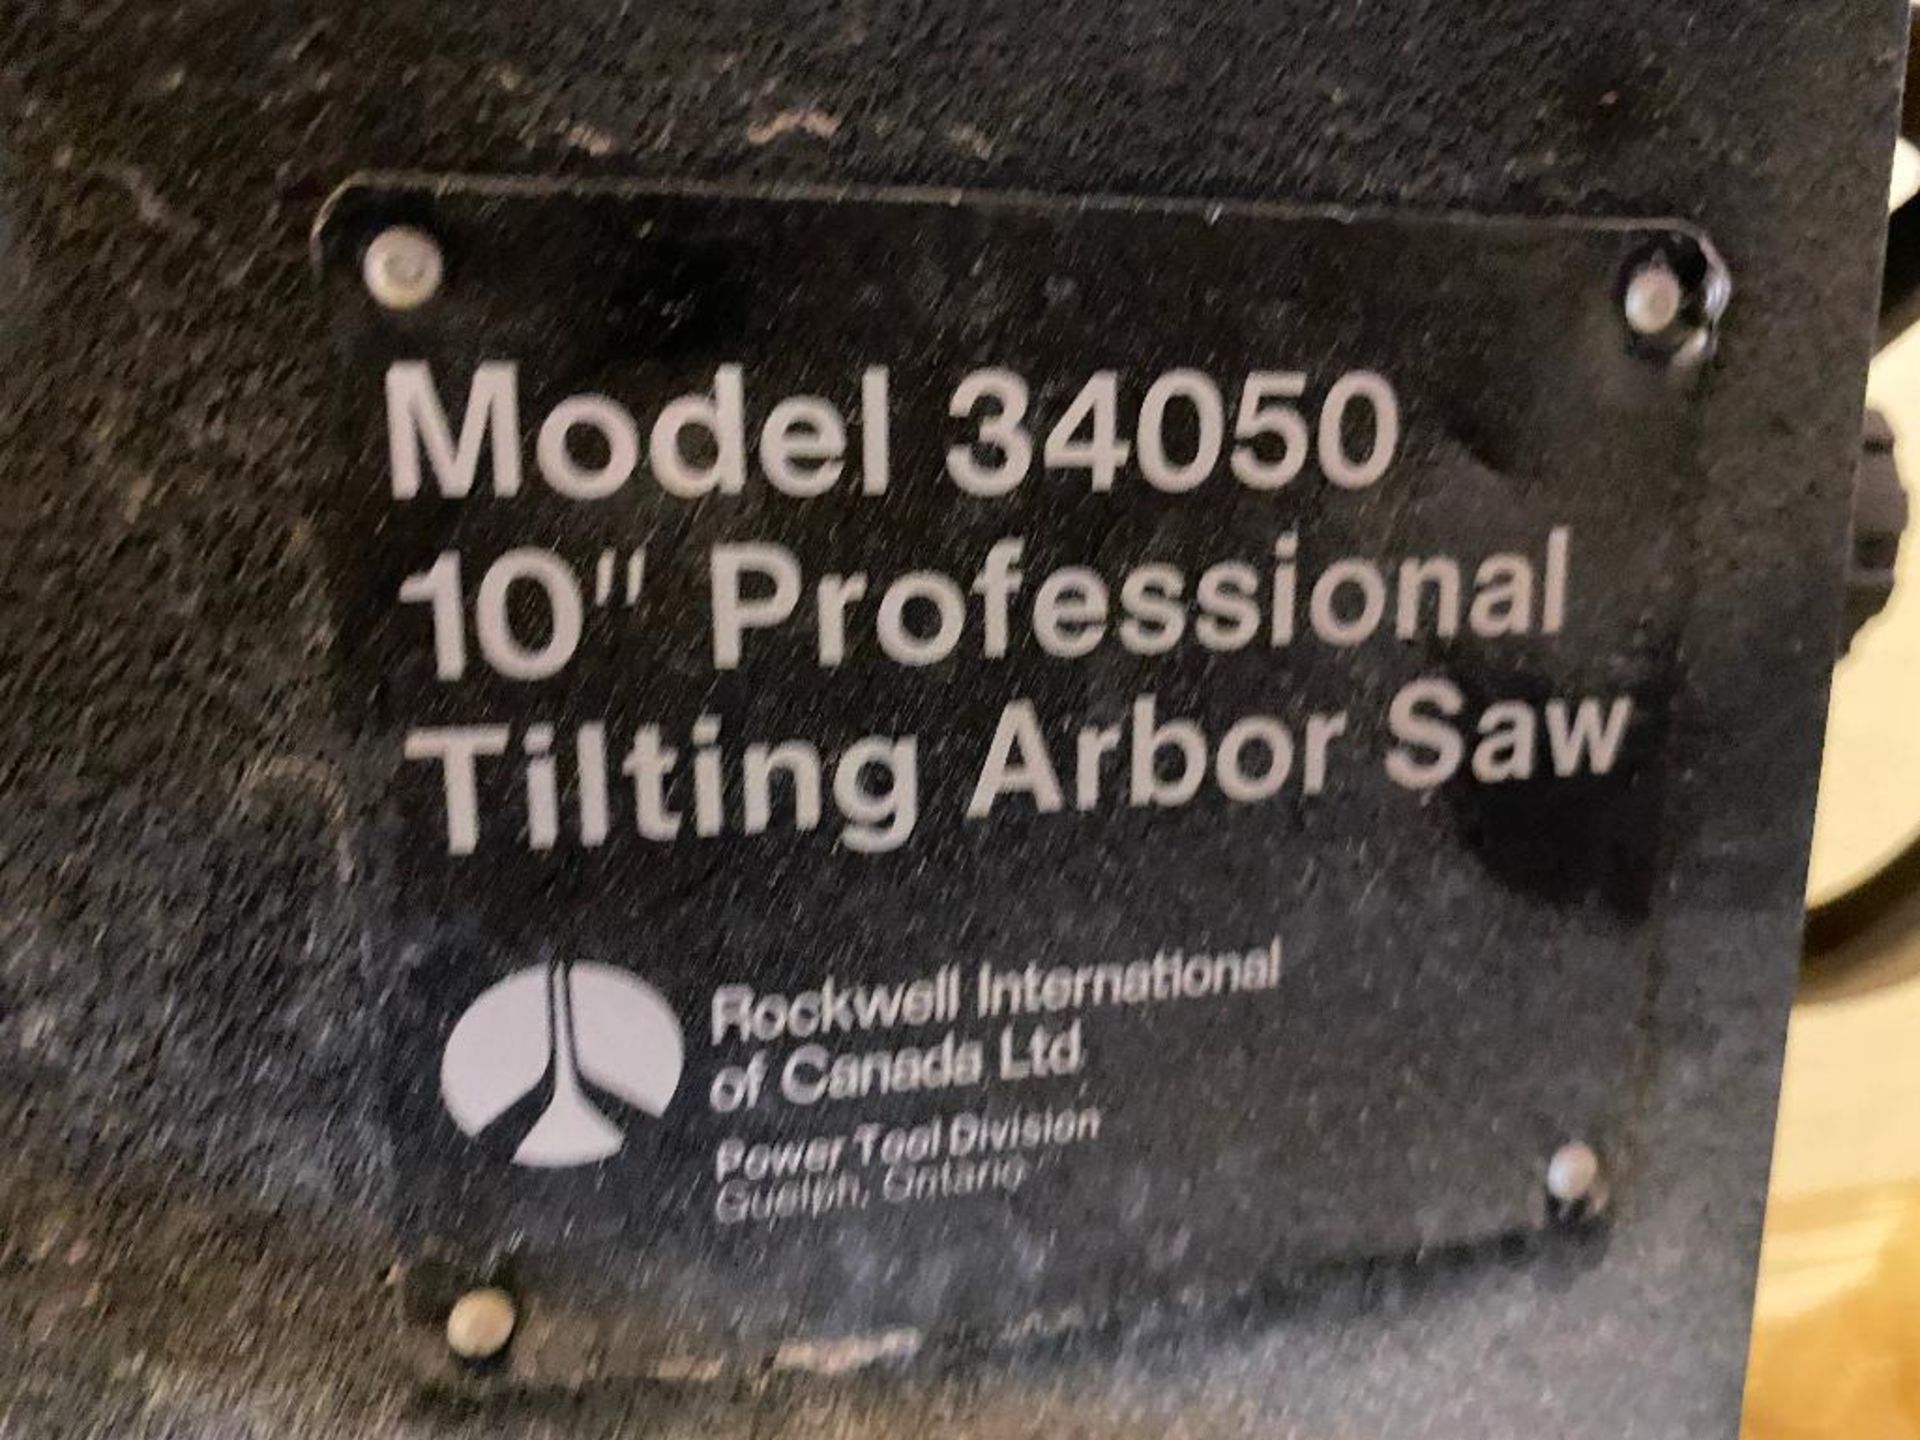 Rockwell 34050 Professional Tilting Arbor Saw - Image 4 of 4